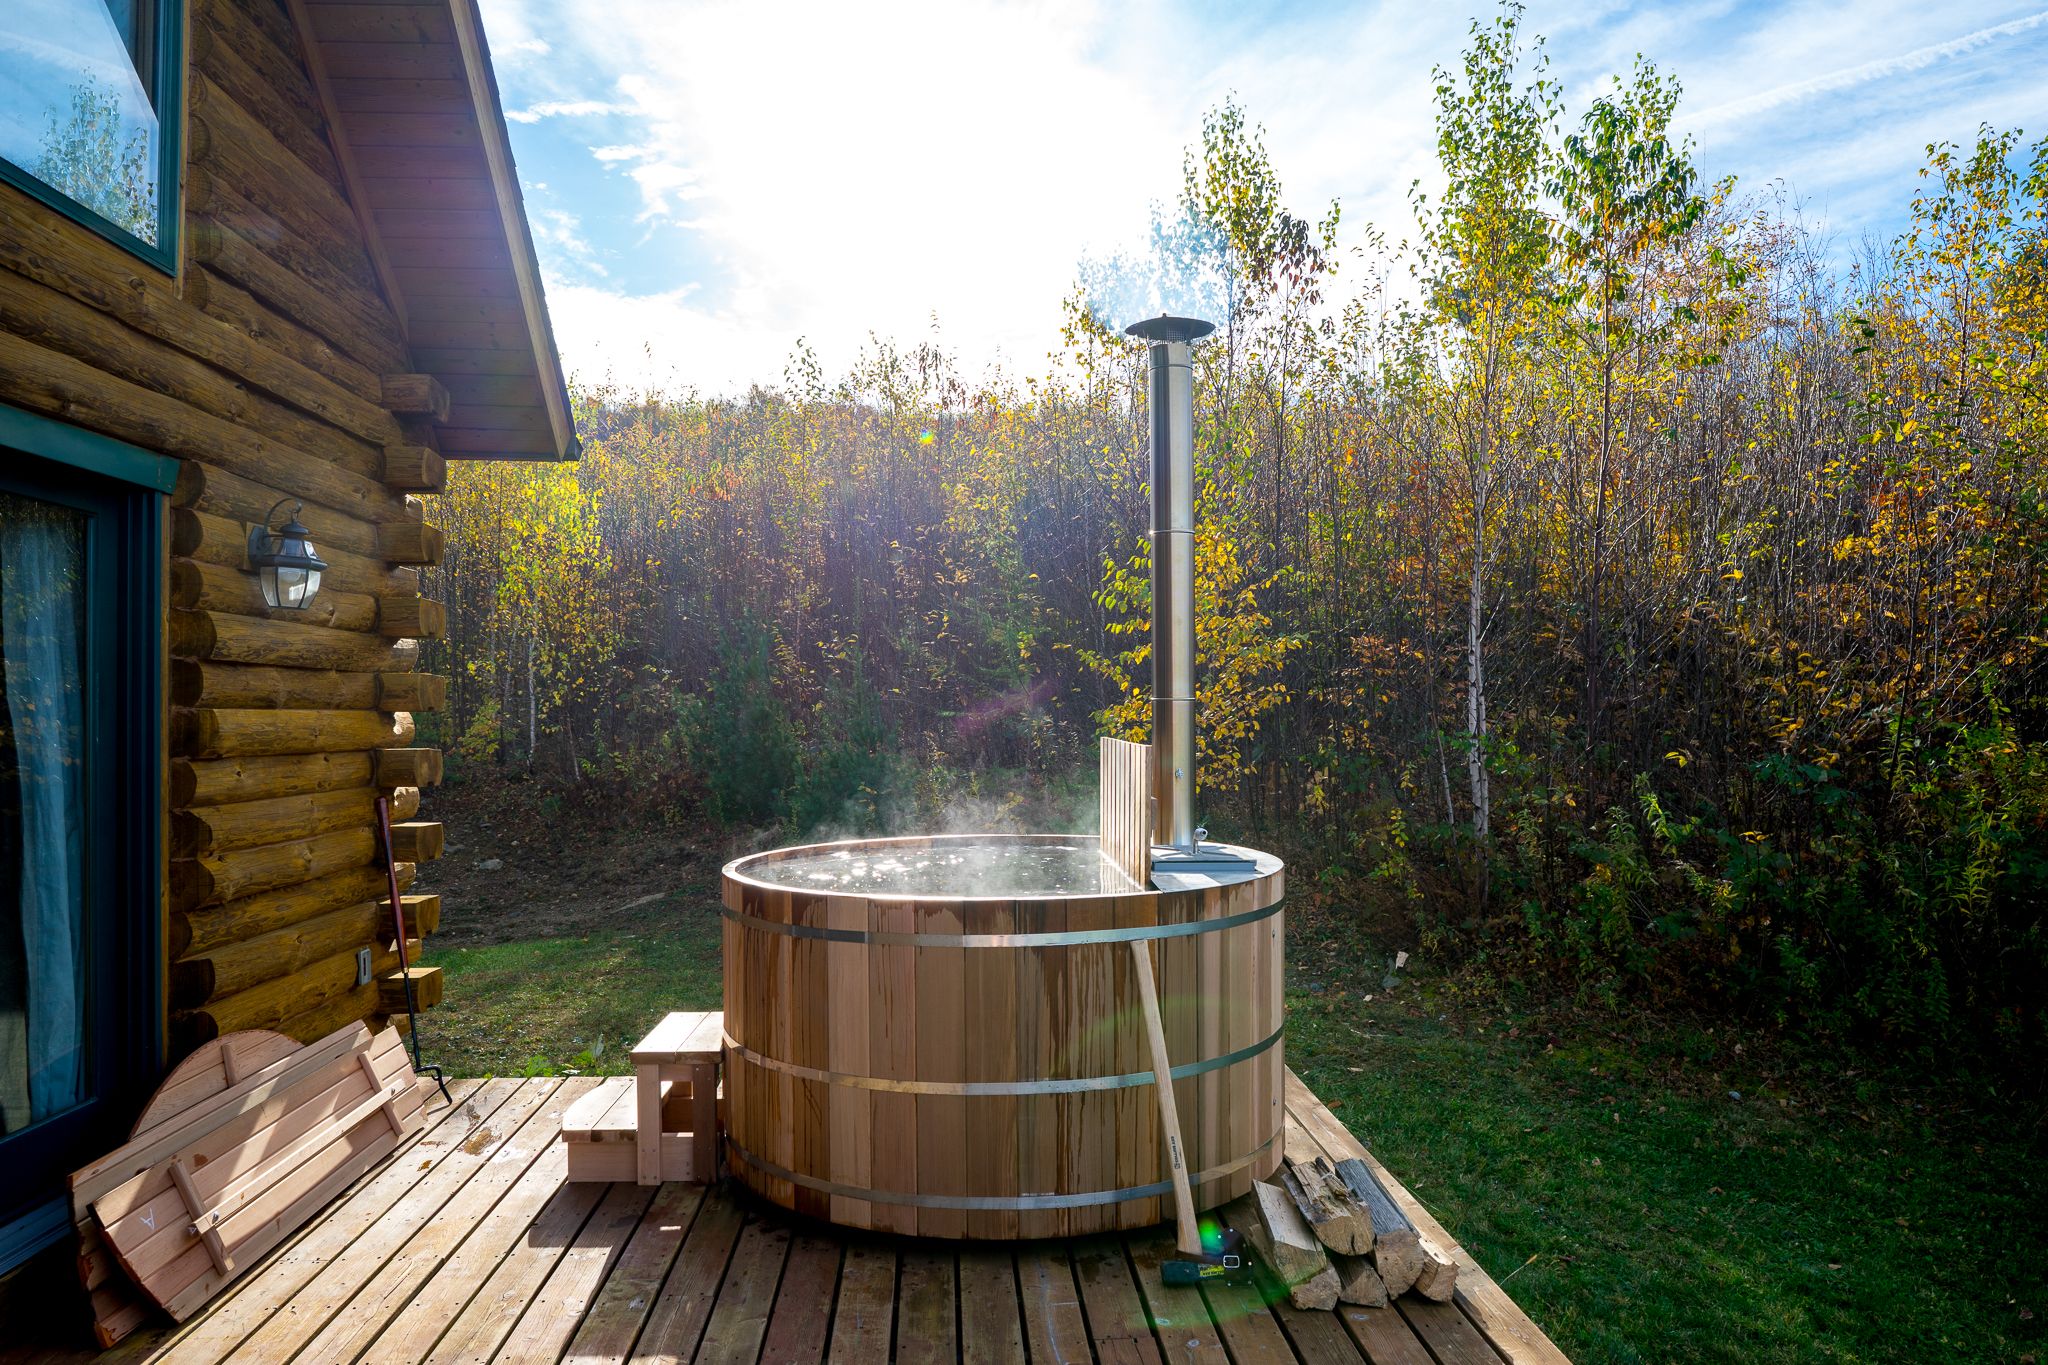 How To Build A Wood-Fired Hot Tub